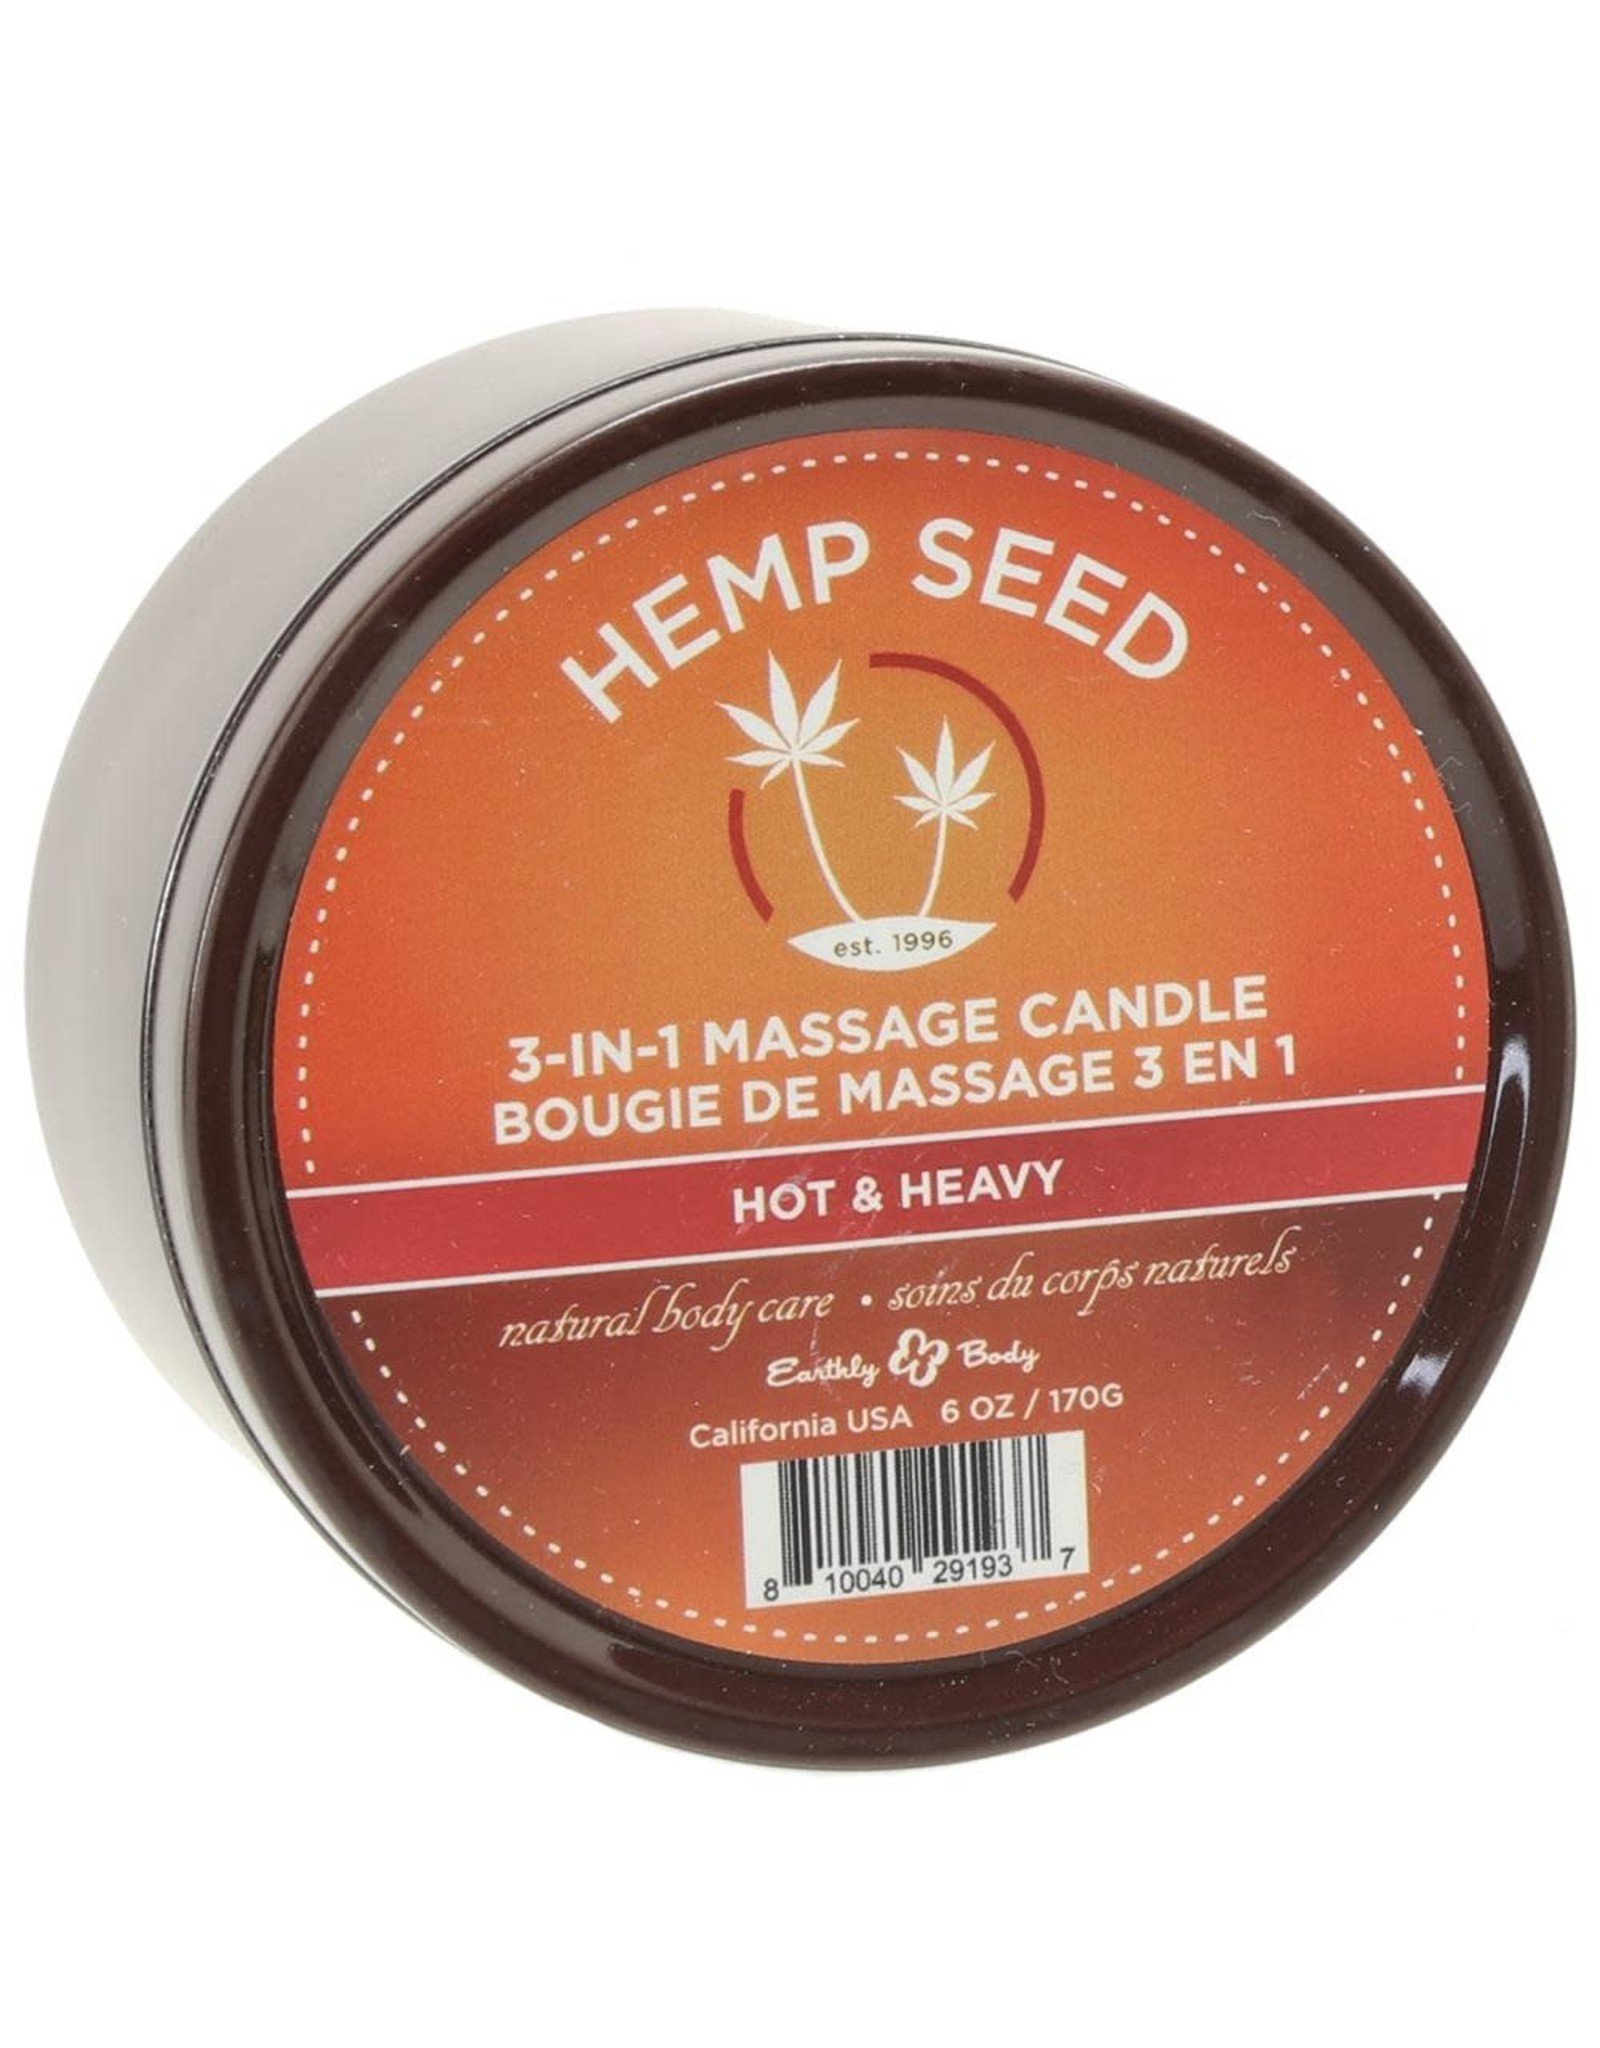 EARTHLY BODY 3-IN-1 SUMMER MASSAGE CANDLE 6OZ/170G - HOT & HEAVY